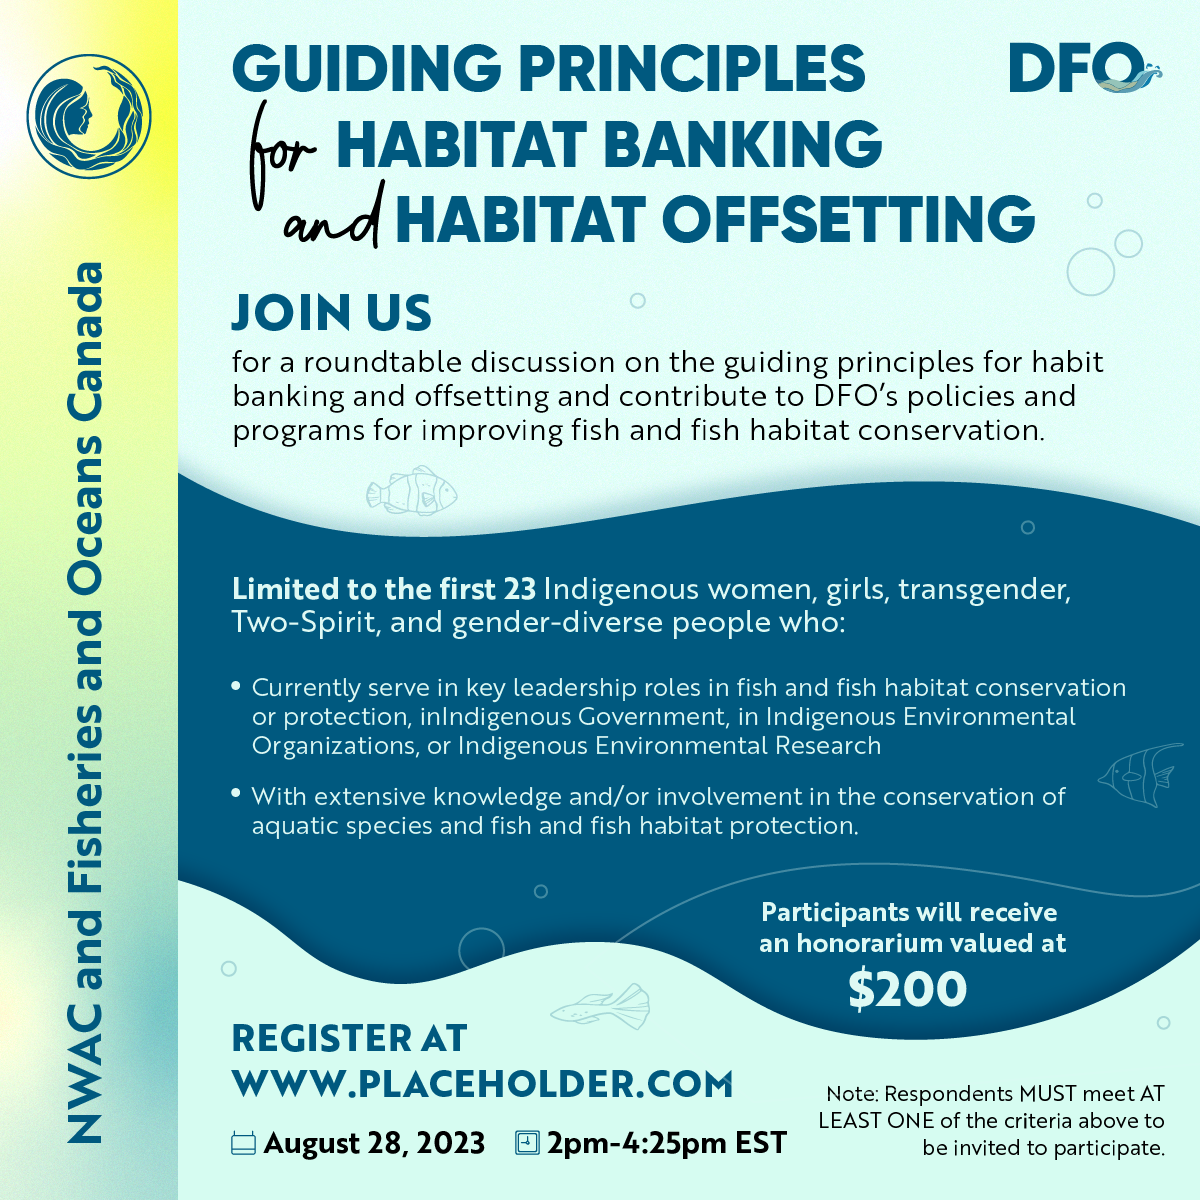 Guiding Principles for Habitat Banking and Habitat Offsetting- August 28, 2023